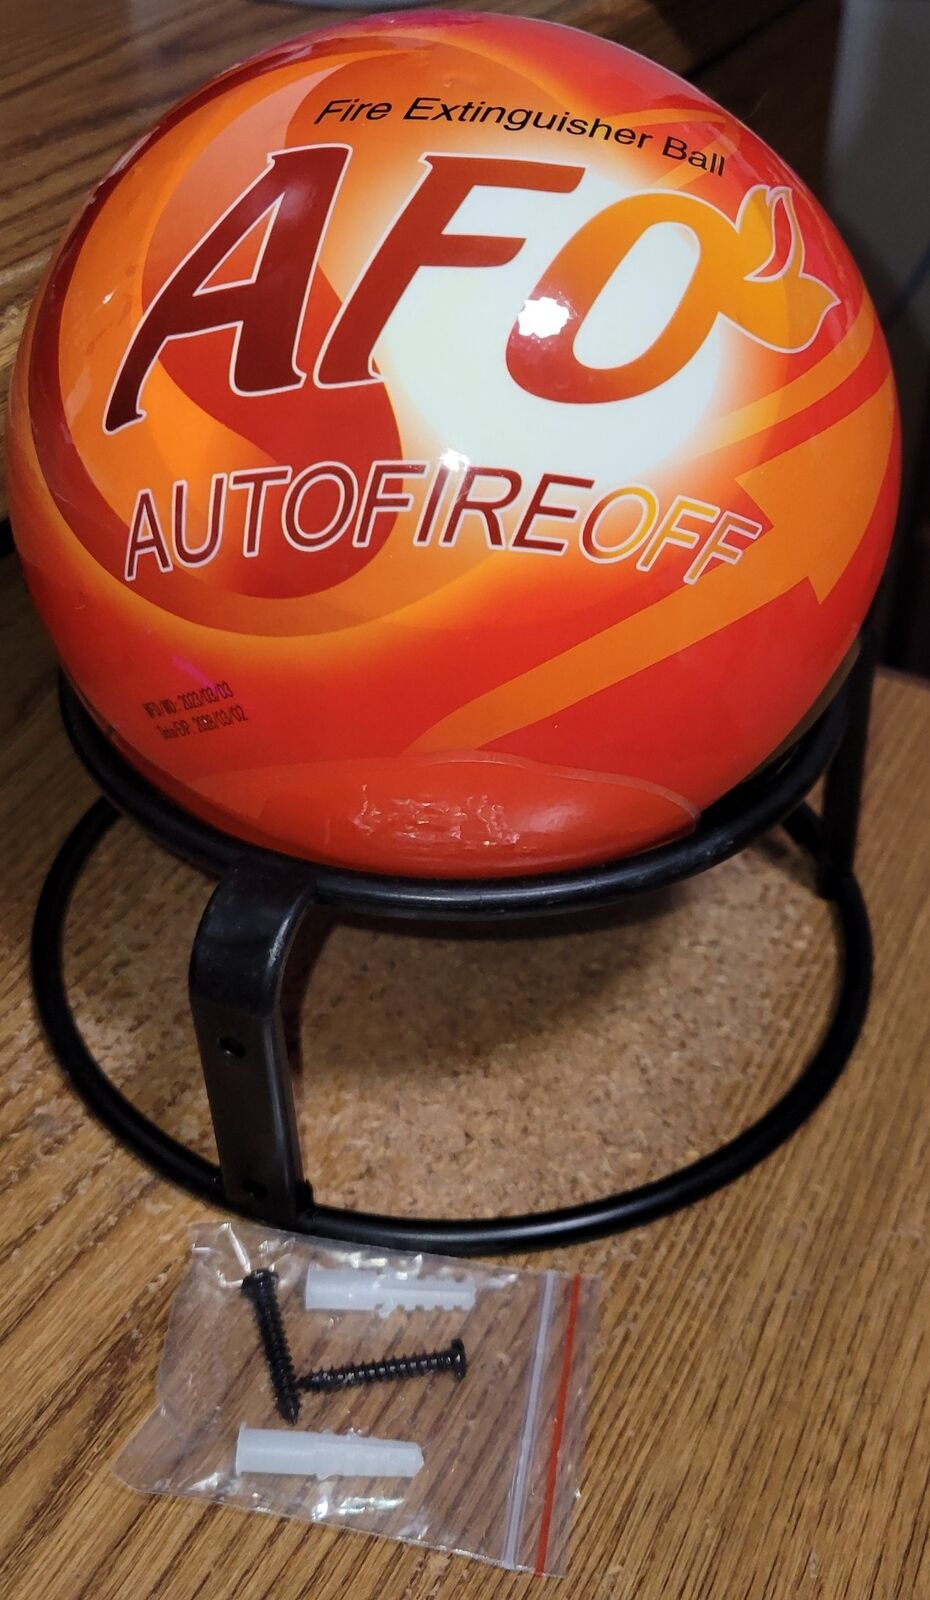 Innovative Fireball Fire Extinguisher - Compact and Effective